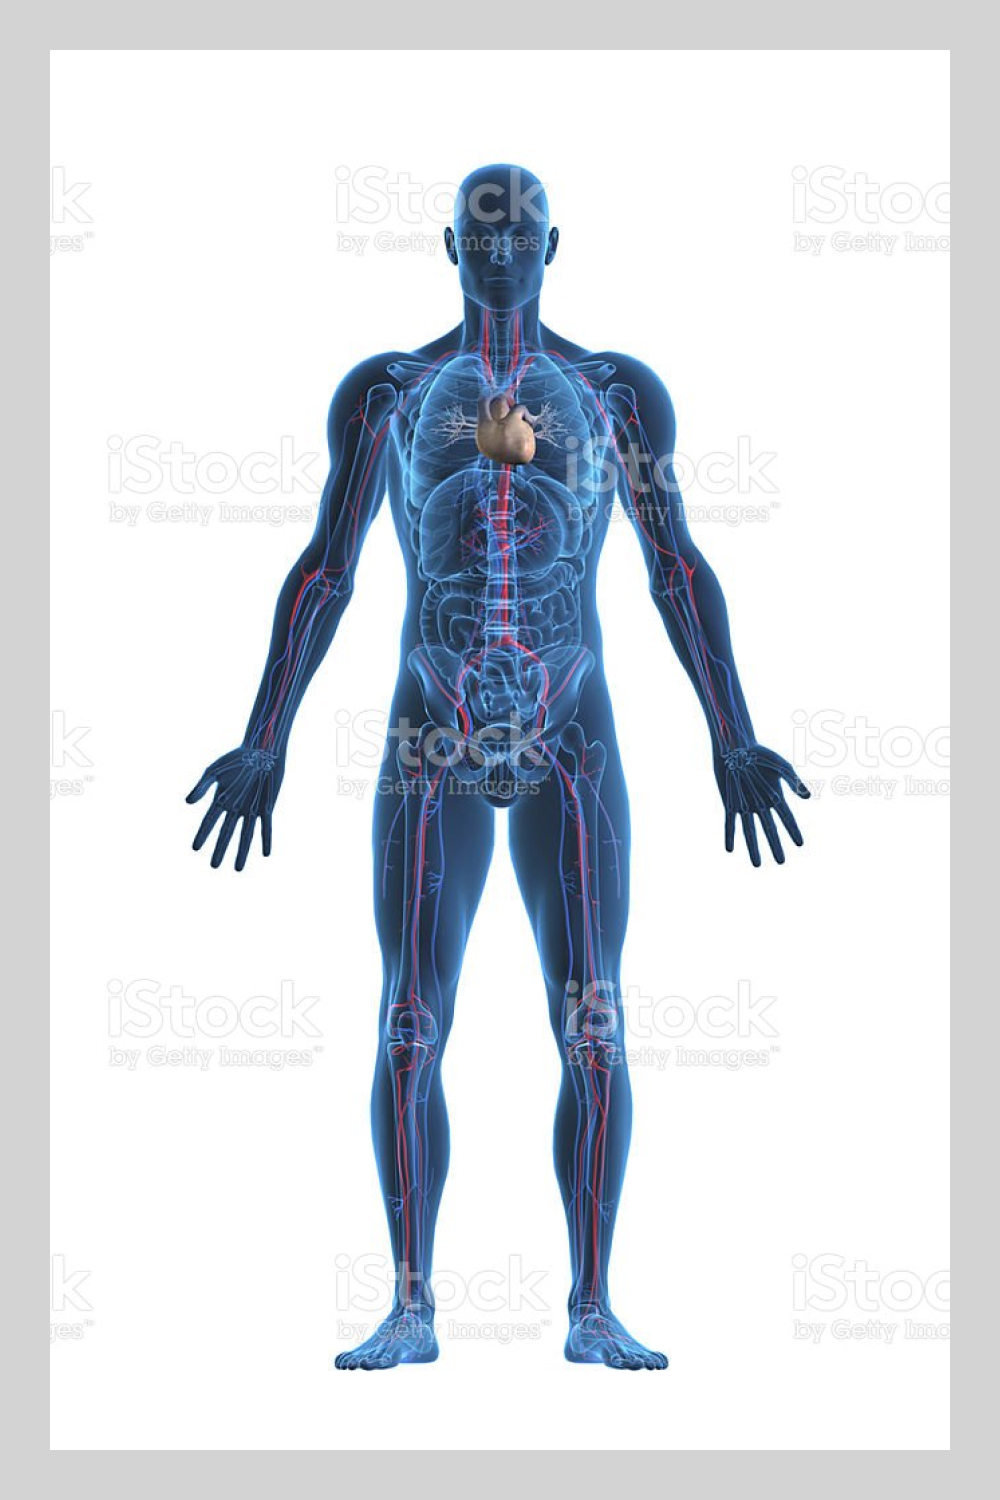 Human heart and vascular system stock photo.